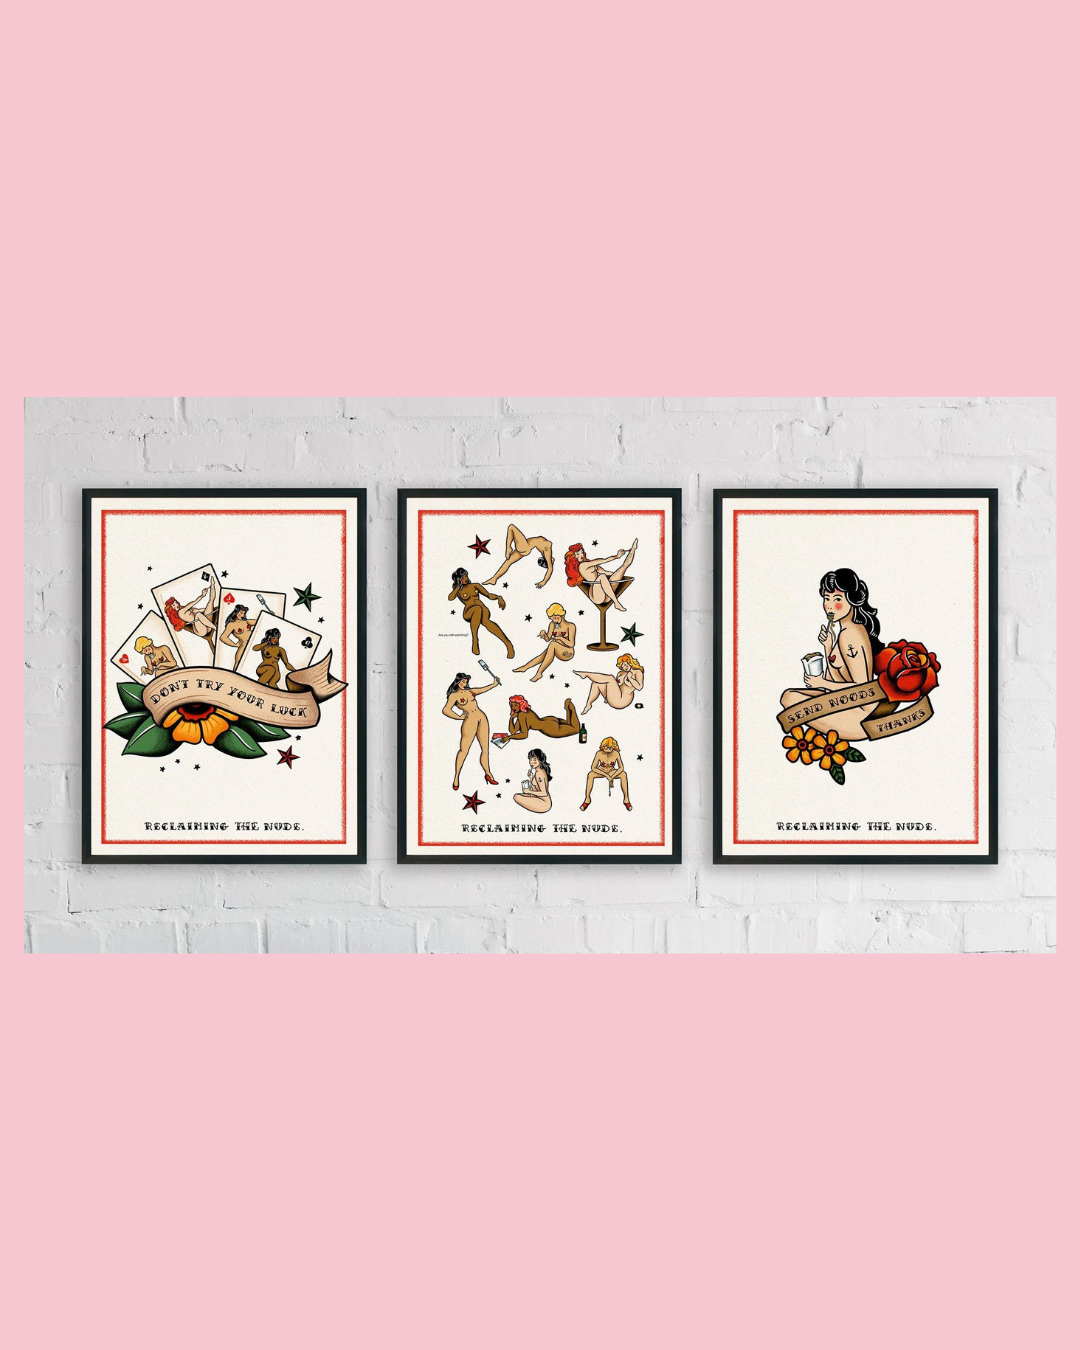 Reclaiming The Nude Postcards (Set Of 3) | Alana McDowell